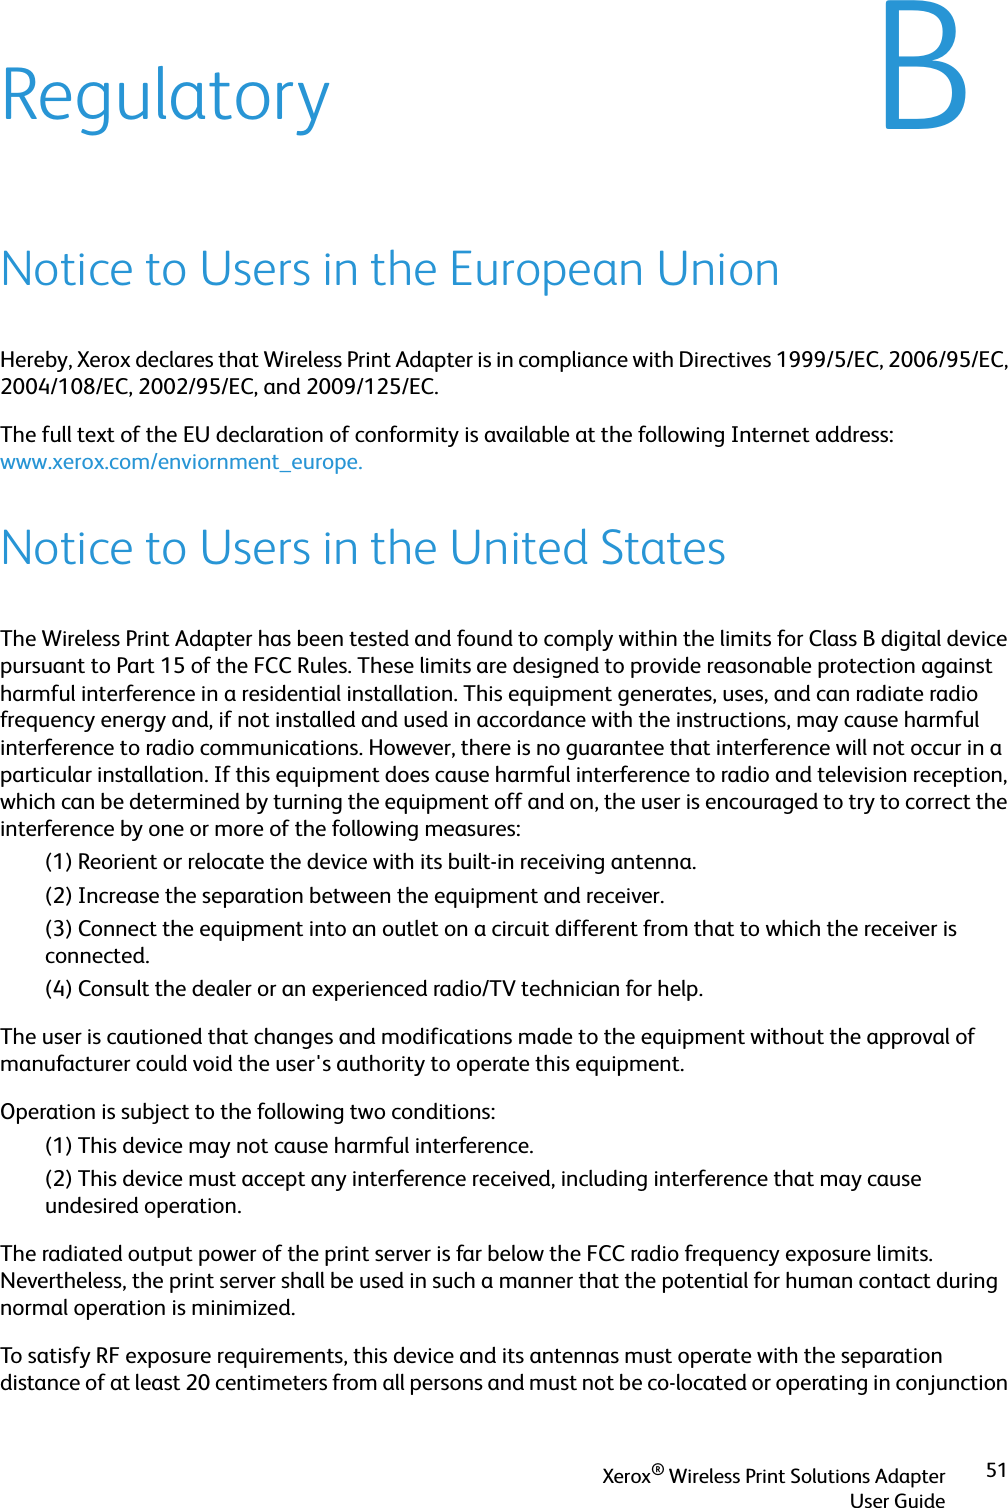 Xerox® Wireless Print Solutions AdapterUser Guide51BRegulatoryNotice to Users in the European UnionHereby, Xerox declares that Wireless Print Adapter is in compliance with Directives 1999/5/EC, 2006/95/EC, 2004/108/EC, 2002/95/EC, and 2009/125/EC. The full text of the EU declaration of conformity is available at the following Internet address:www.xerox.com/enviornment_europe.Notice to Users in the United StatesThe Wireless Print Adapter has been tested and found to comply within the limits for Class B digital device pursuant to Part 15 of the FCC Rules. These limits are designed to provide reasonable protection against harmful interference in a residential installation. This equipment generates, uses, and can radiate radio frequency energy and, if not installed and used in accordance with the instructions, may cause harmful interference to radio communications. However, there is no guarantee that interference will not occur in a particular installation. If this equipment does cause harmful interference to radio and television reception, which can be determined by turning the equipment off and on, the user is encouraged to try to correct the interference by one or more of the following measures:(1) Reorient or relocate the device with its built-in receiving antenna.(2) Increase the separation between the equipment and receiver.(3) Connect the equipment into an outlet on a circuit different from that to which the receiver is connected.(4) Consult the dealer or an experienced radio/TV technician for help.The user is cautioned that changes and modifications made to the equipment without the approval of manufacturer could void the user&apos;s authority to operate this equipment.Operation is subject to the following two conditions:(1) This device may not cause harmful interference.(2) This device must accept any interference received, including interference that may cause undesired operation.The radiated output power of the print server is far below the FCC radio frequency exposure limits. Nevertheless, the print server shall be used in such a manner that the potential for human contact during normal operation is minimized.To satisfy RF exposure requirements, this device and its antennas must operate with the separation distance of at least 20 centimeters from all persons and must not be co-located or operating in conjunction 